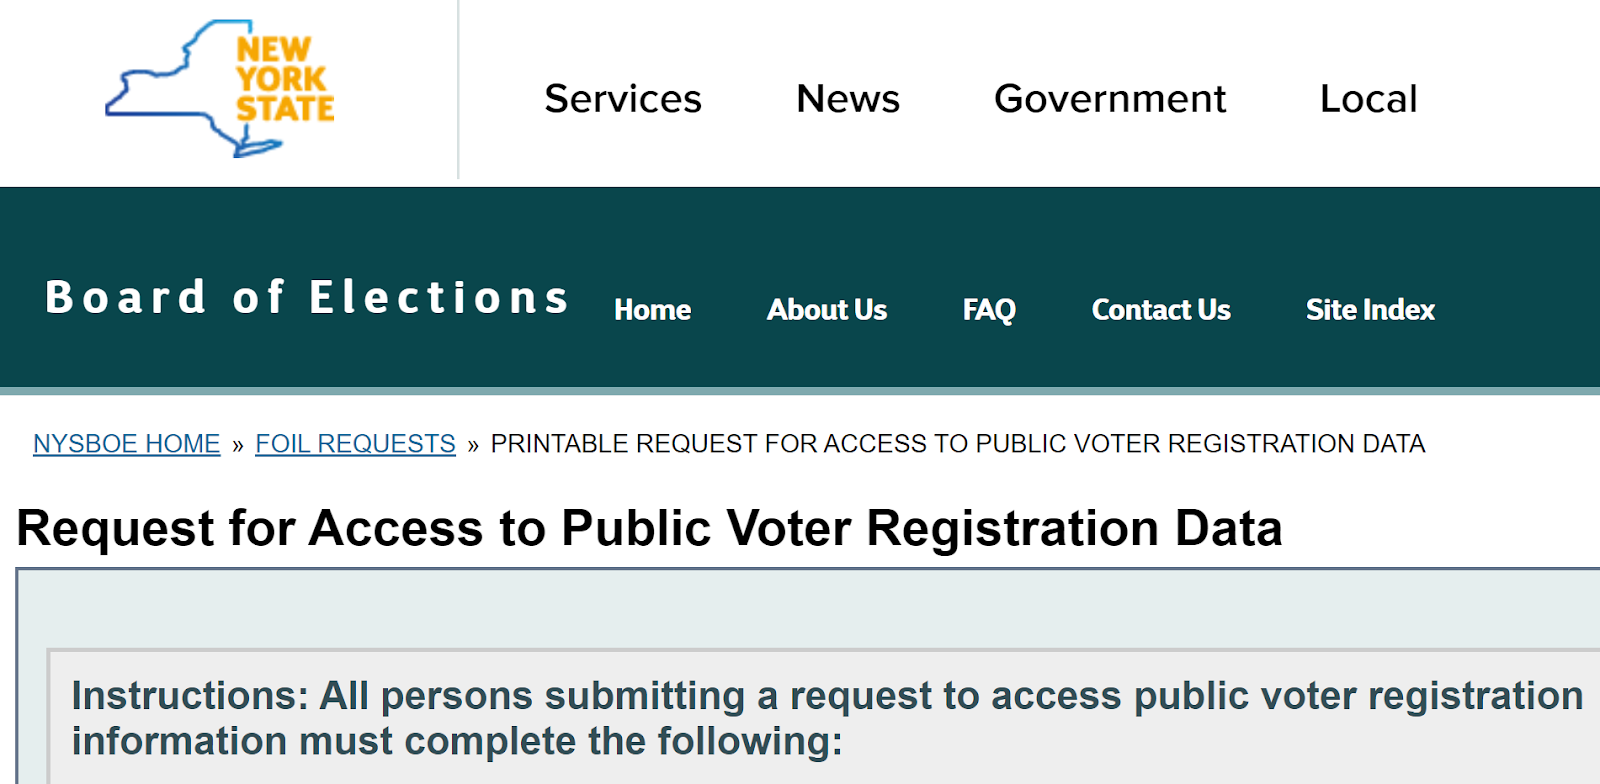 Figure 4: New York State website for attaining access to voter information via an online form. https://www.elections.ny.gov/FoilRequests.html